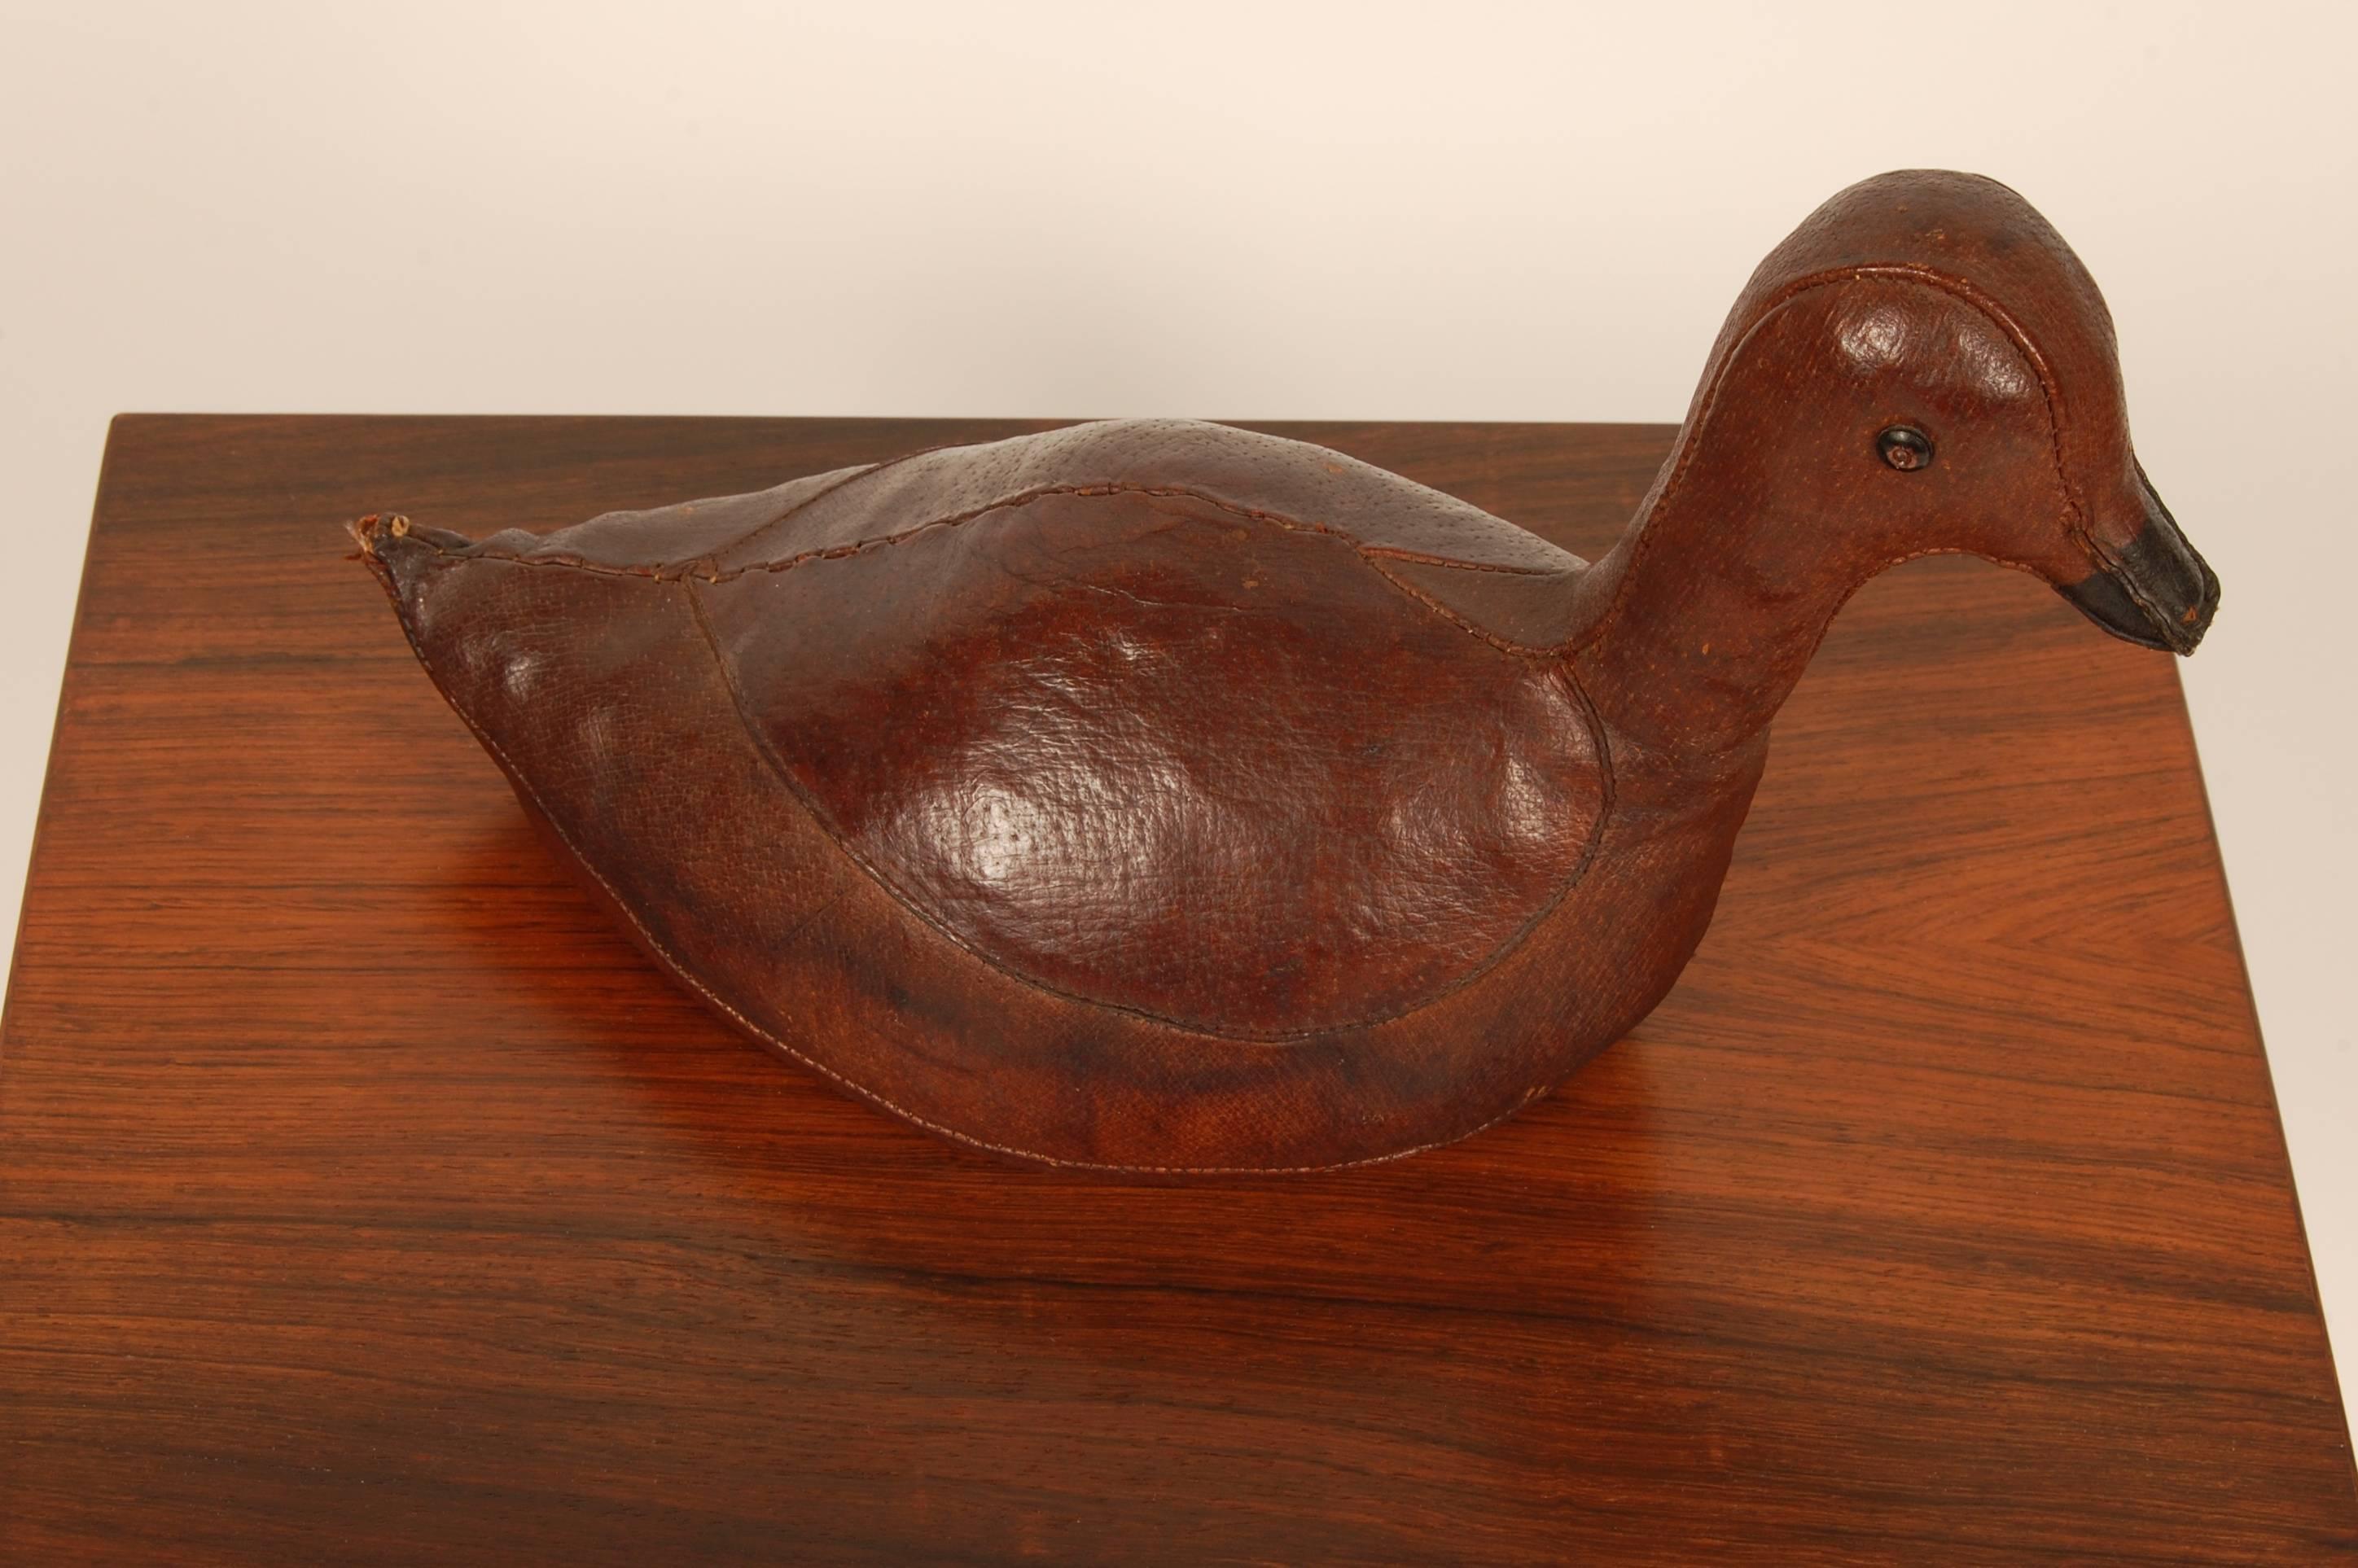 Abercrombie and Fitch Leather Duck Decoy 1